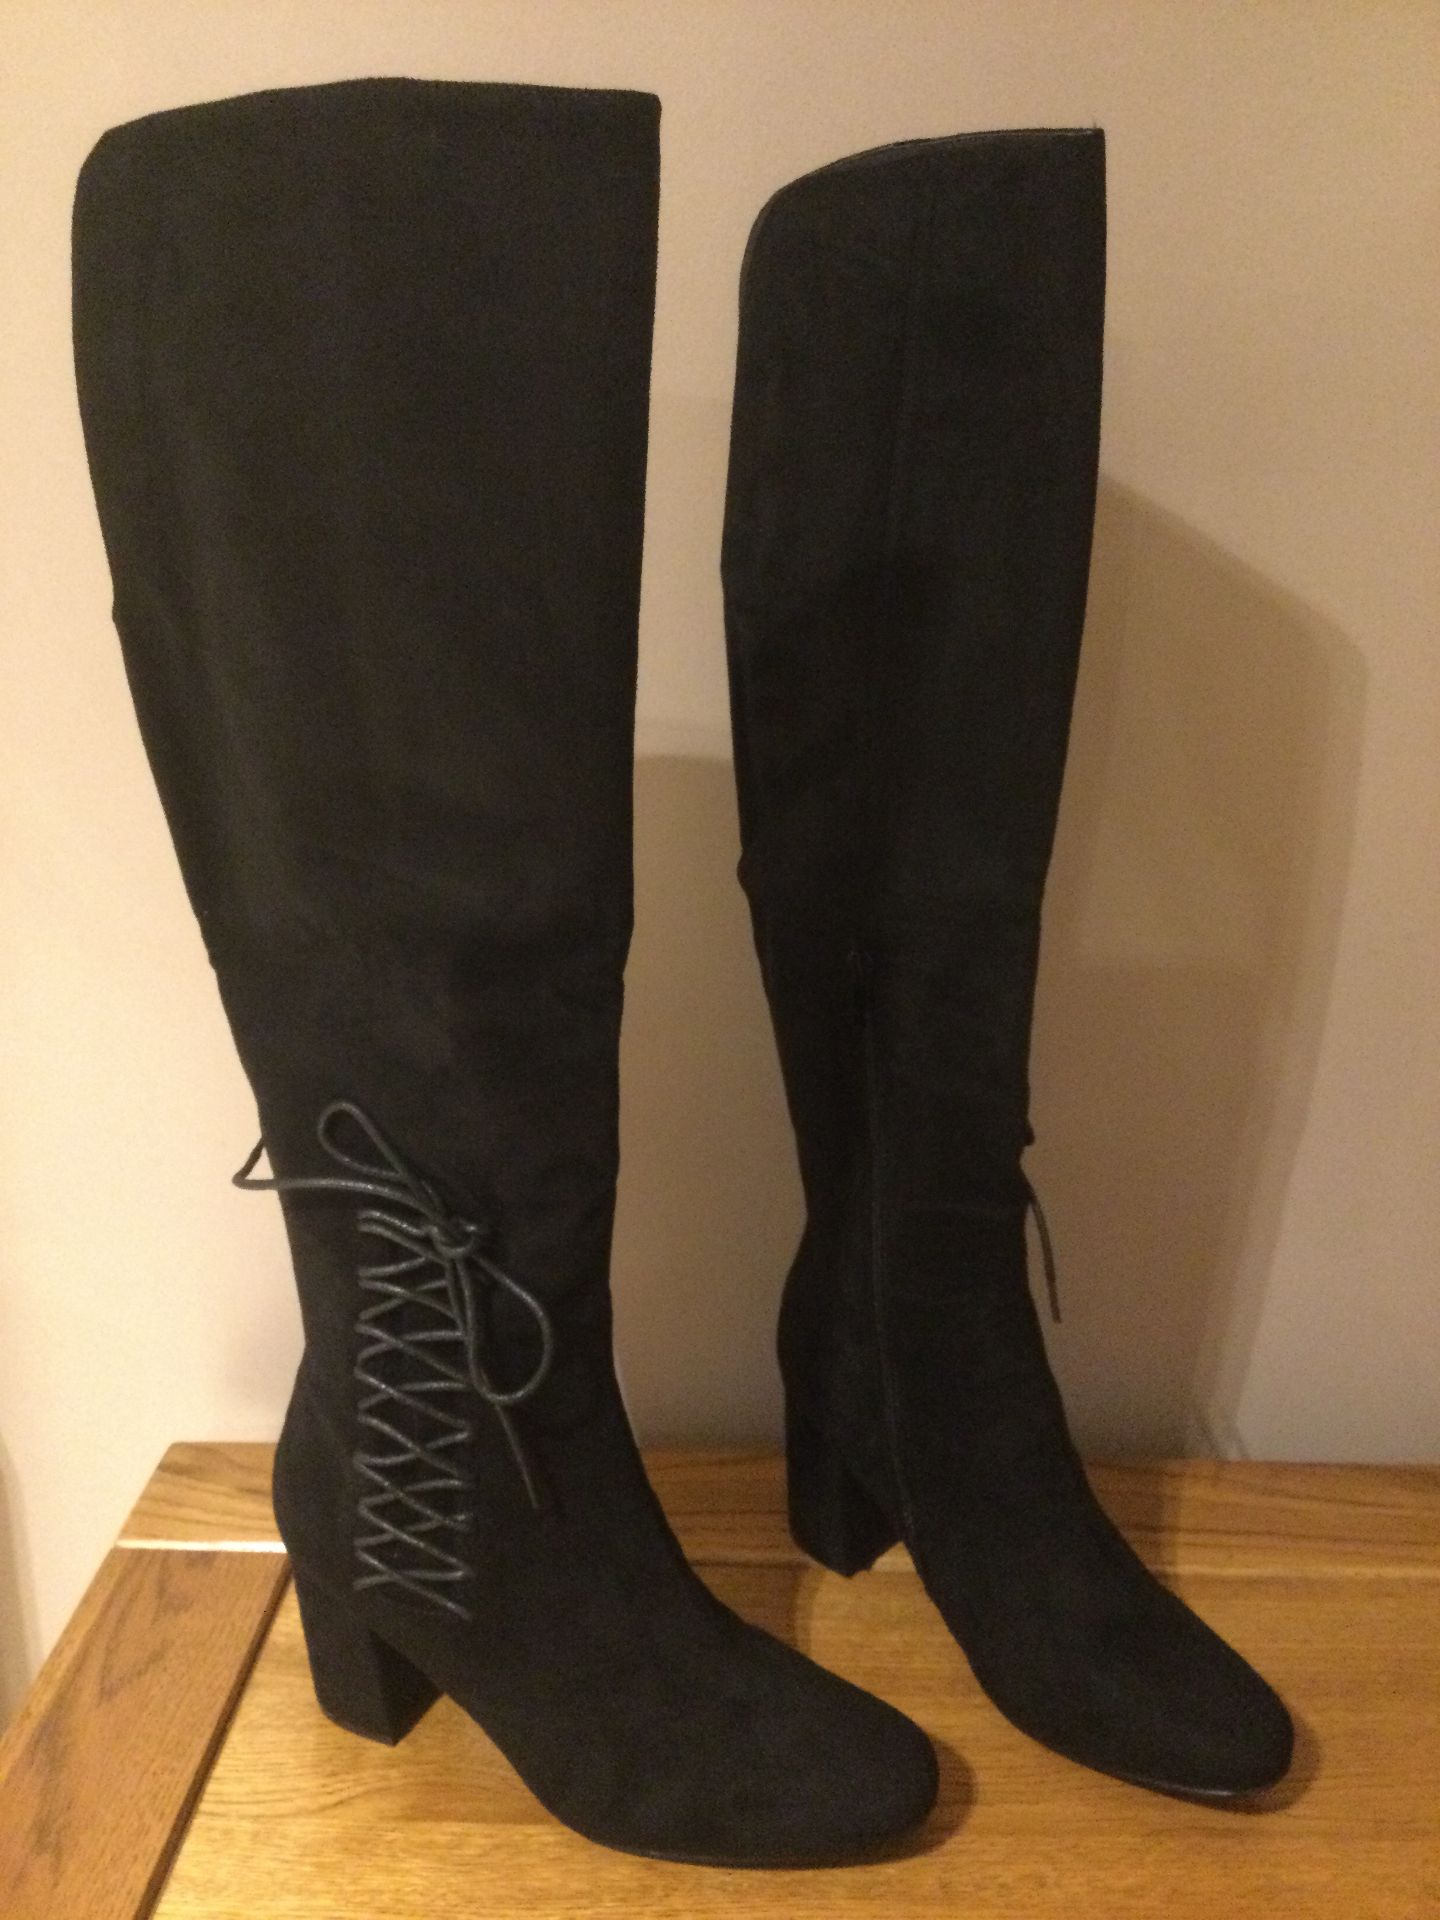 Dolcis “Emma” Long Boots, Block Heel, Size 3, Black - New RRP £55.00 - Image 5 of 7